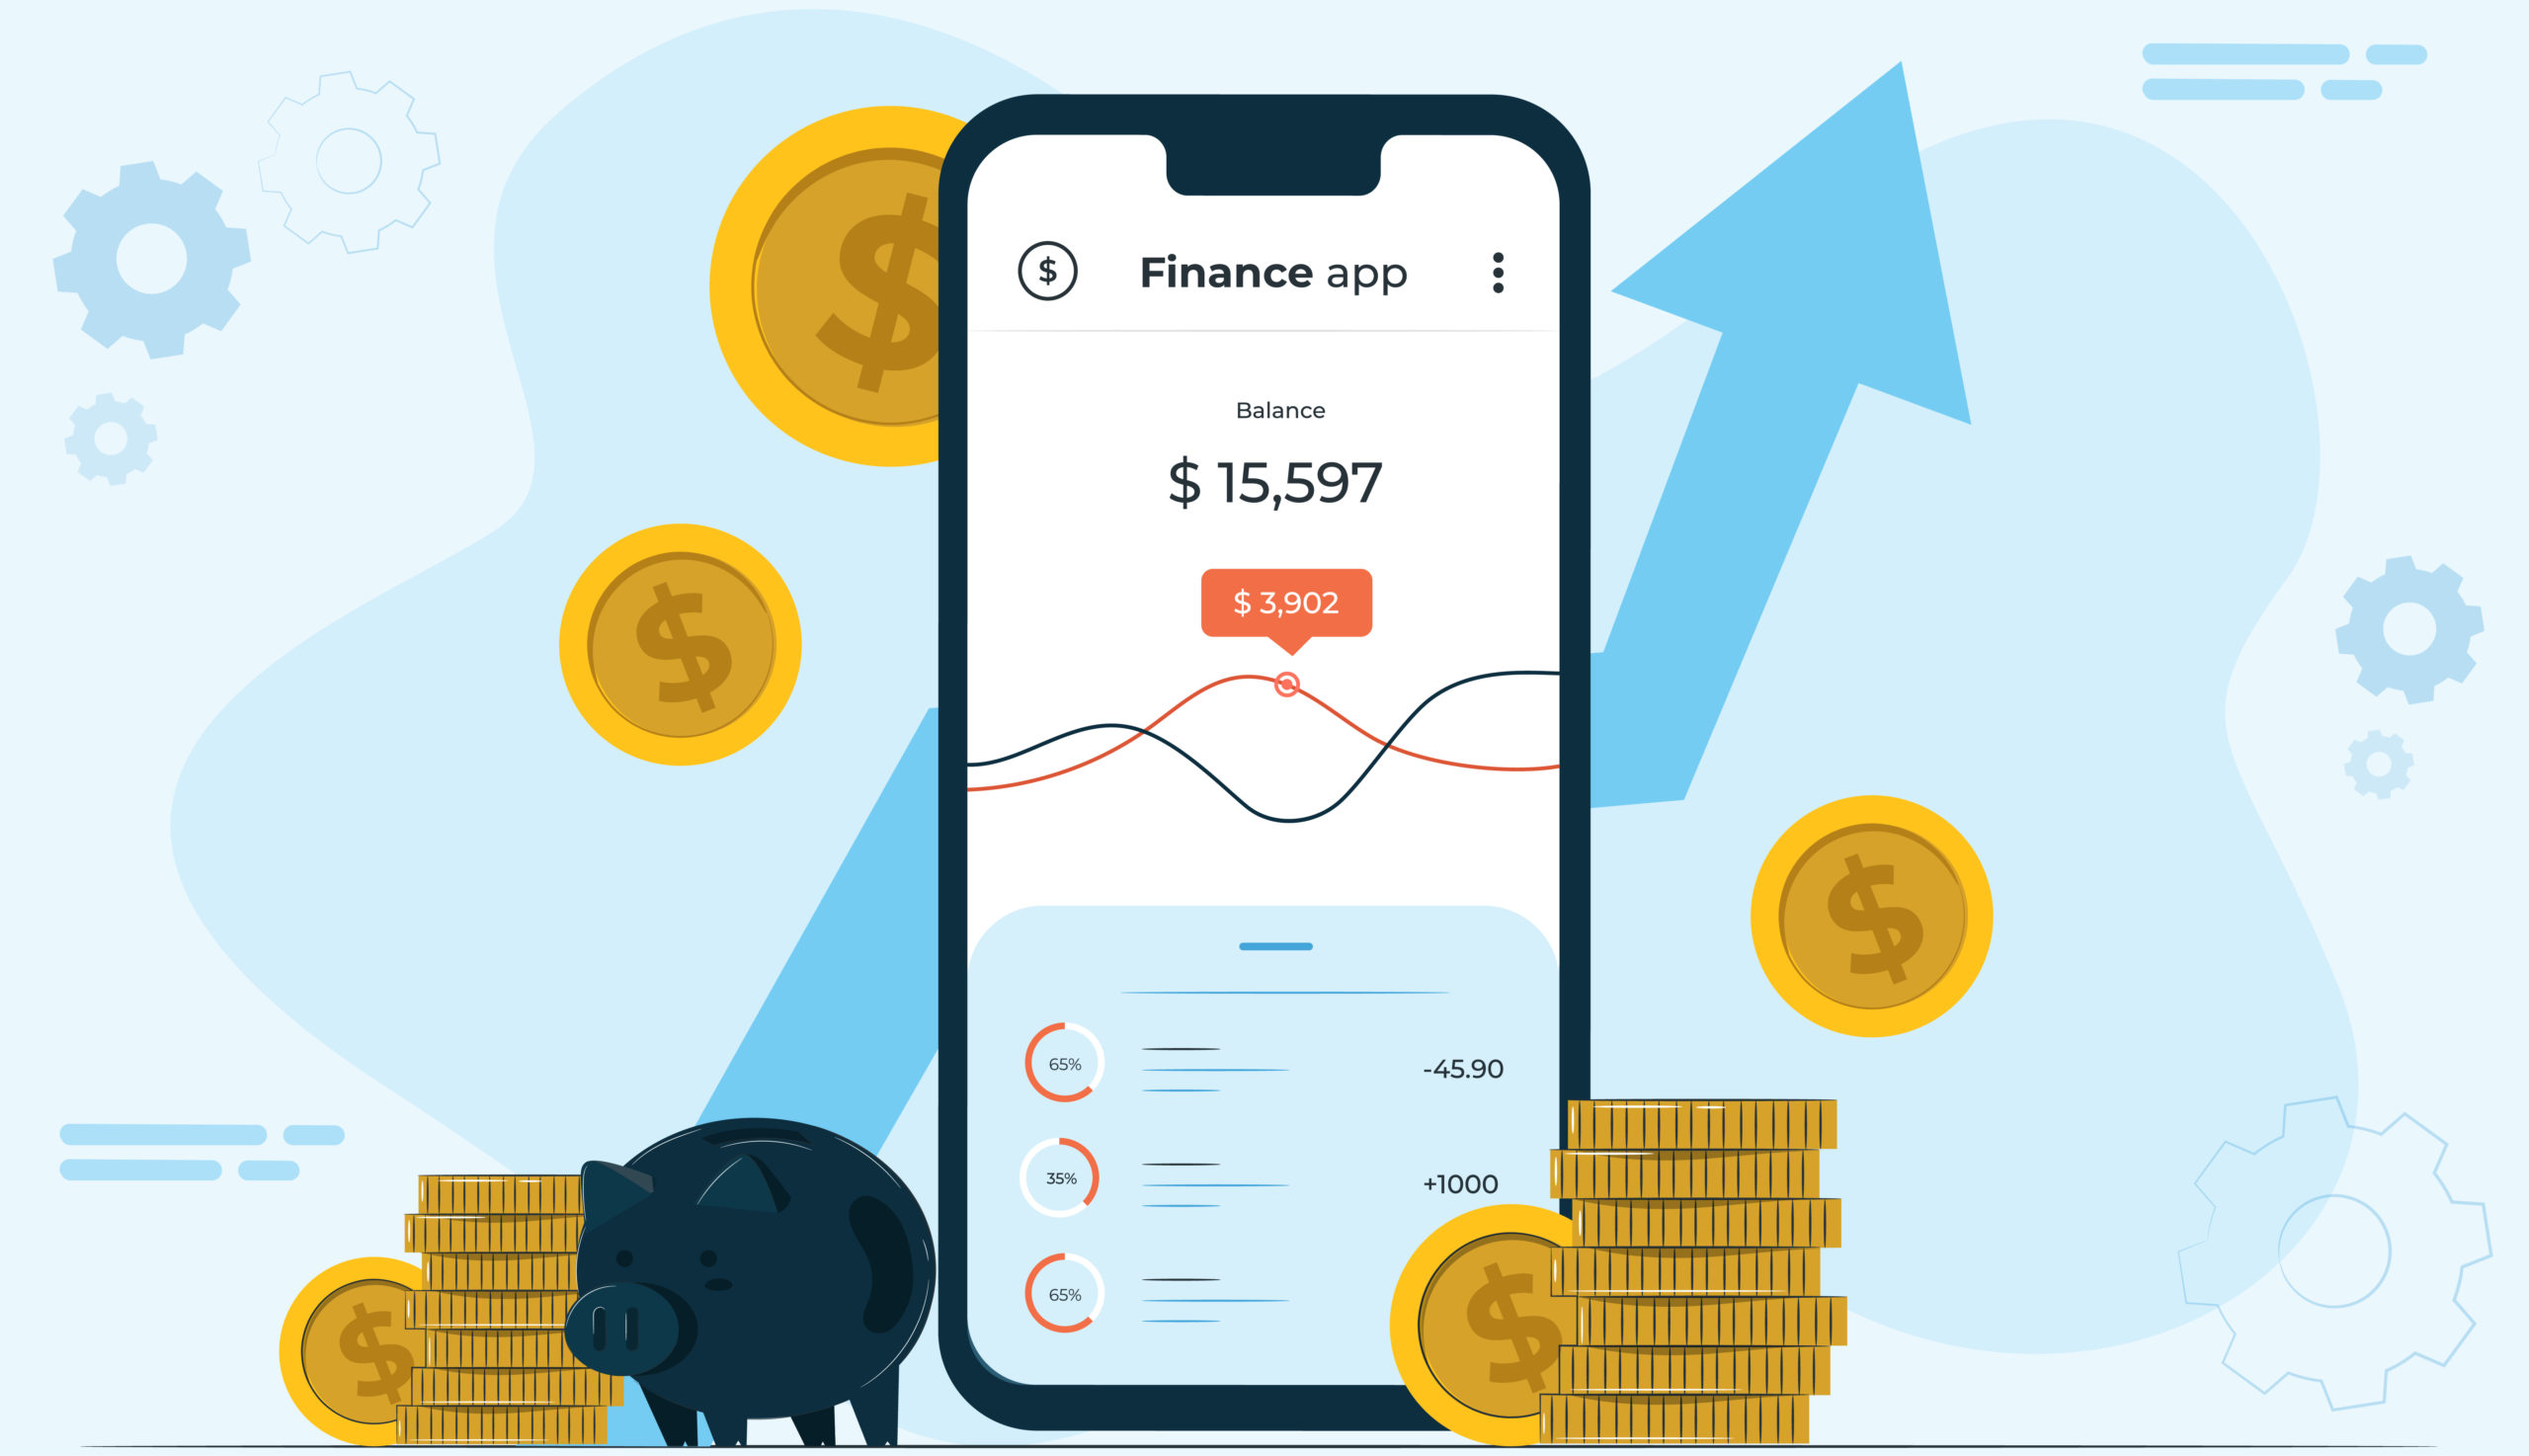 How to Attract Millennials and Gen Z to Your Finance App | Finance Apps | AdAction.com